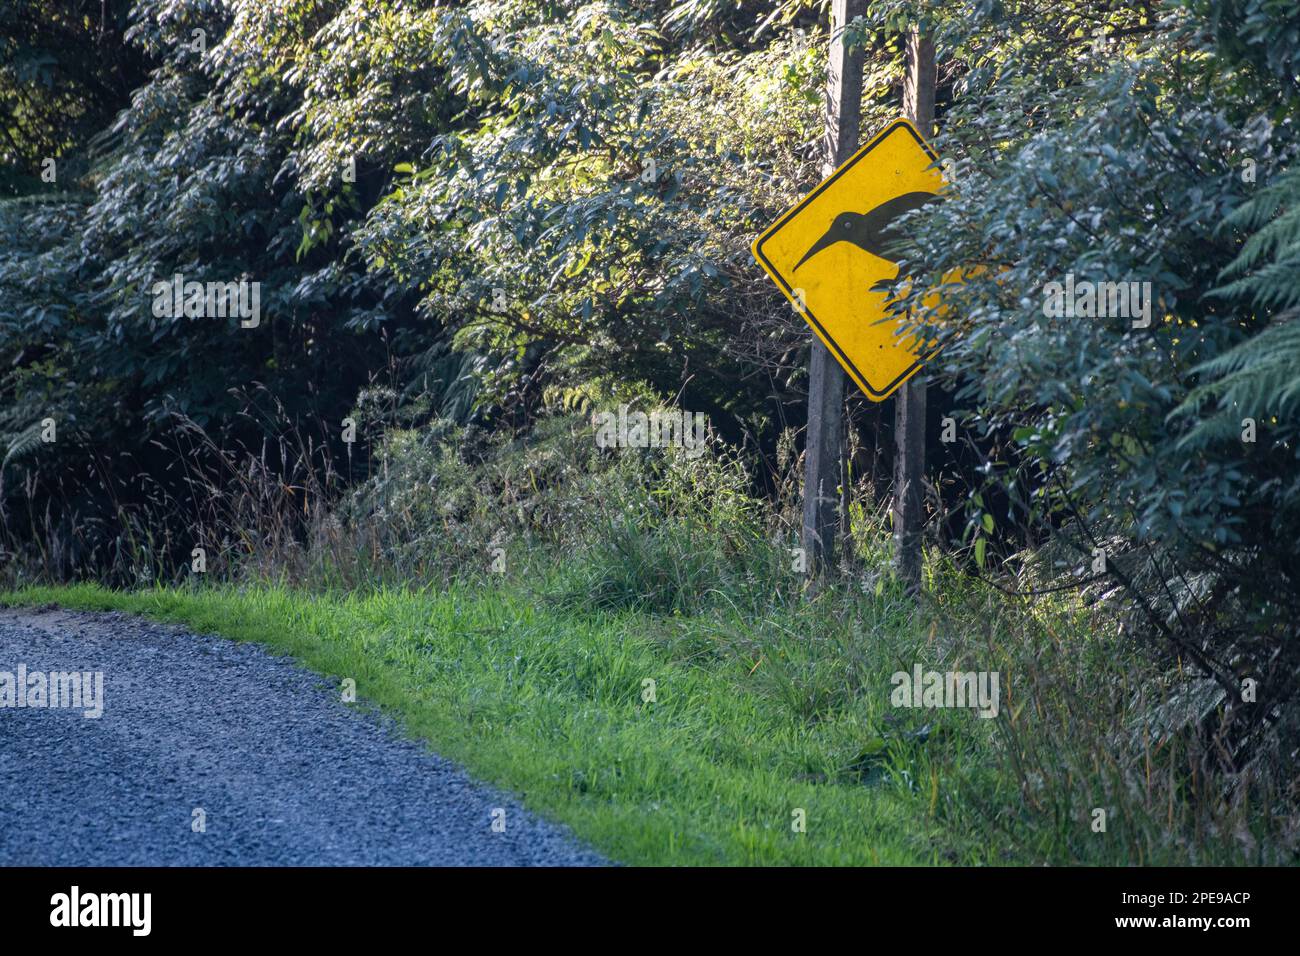 A yellow kiwi crossing sign warns drivers to be cautious of wildlife crossing the road. Stock Photo